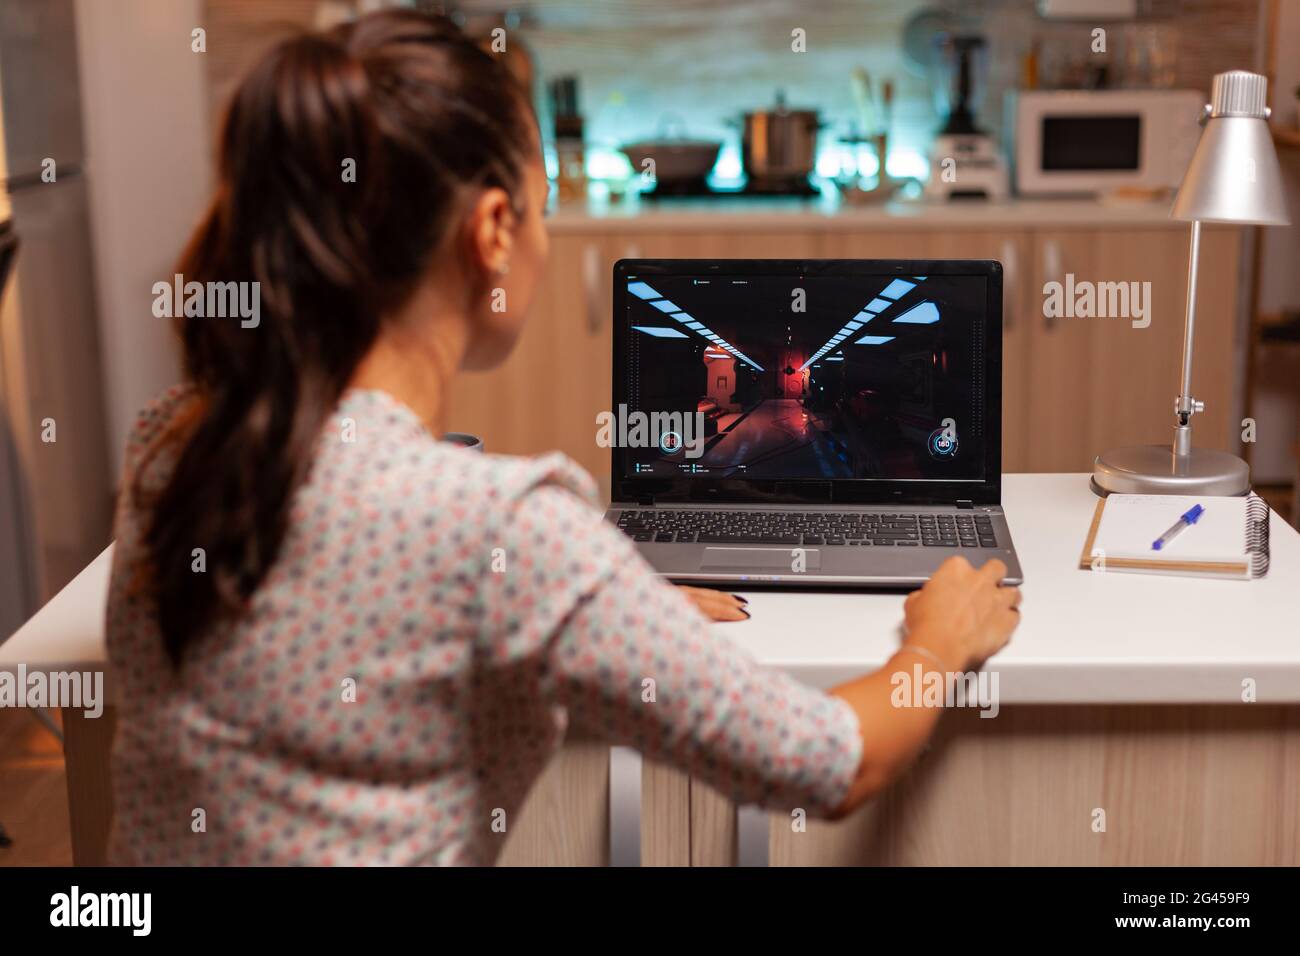 Lady playing games on laptop during night time during night time in home kitchen. Professional gamer playing online videop games on her personal computer. Geek cyber e-sport. Stock Photo